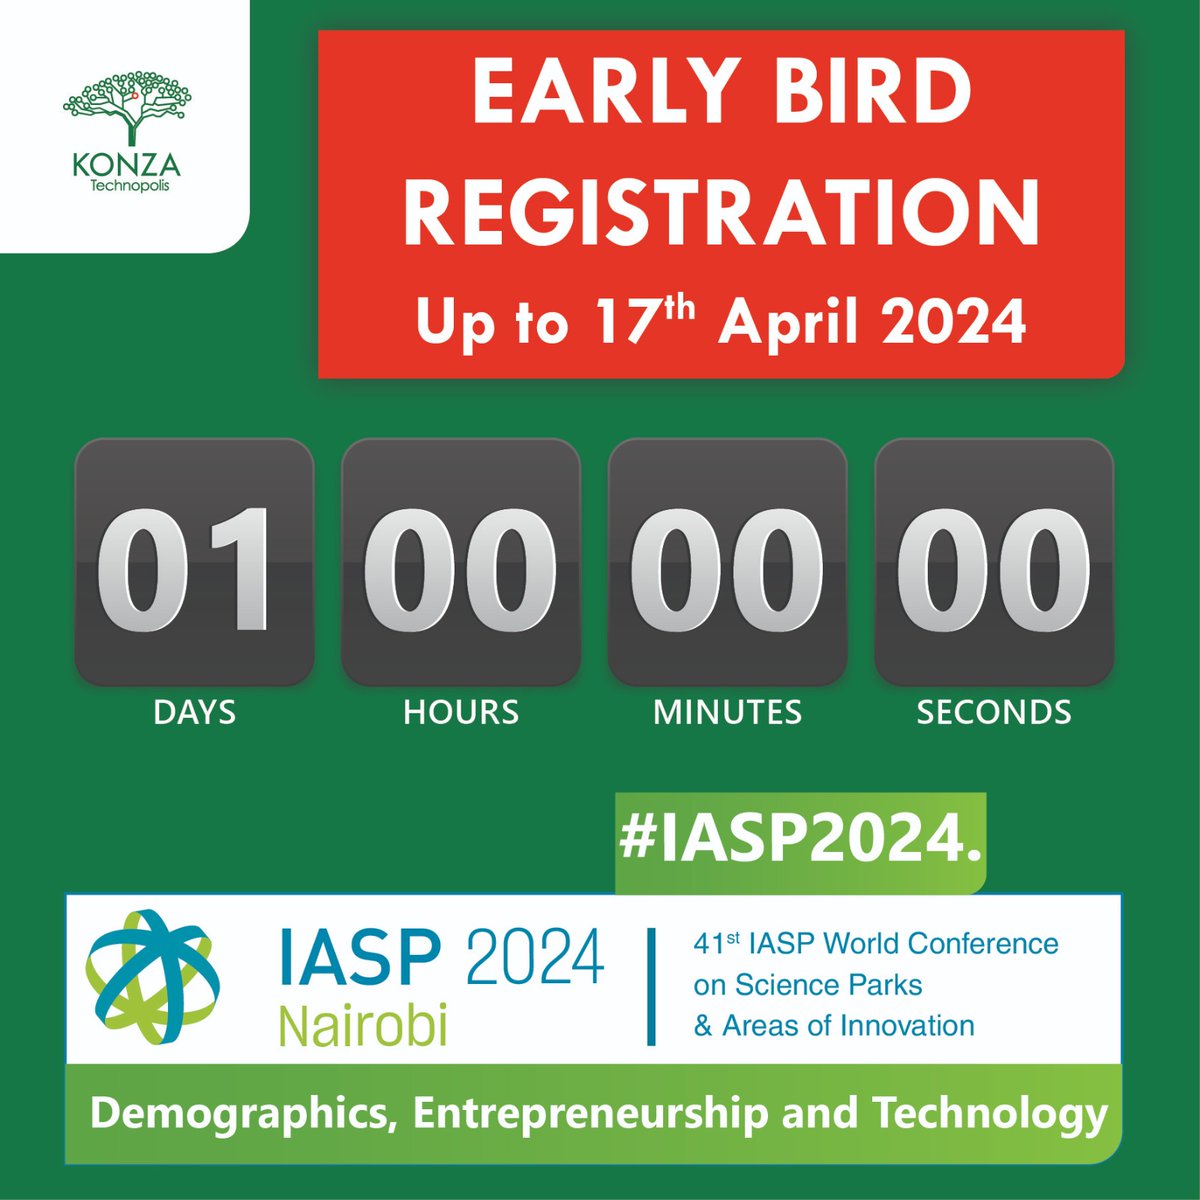 ONE DAY TO GO!! Ensure that you secure your spot to be part of making innovation history by taking advantage of the early bird #IASP2024 registration pricing NOW on b-com.mci-group.com/CommunityPorta… #LetsGoToKenya #KonzaTechnopolis #SmartCity #SiliconSavannah